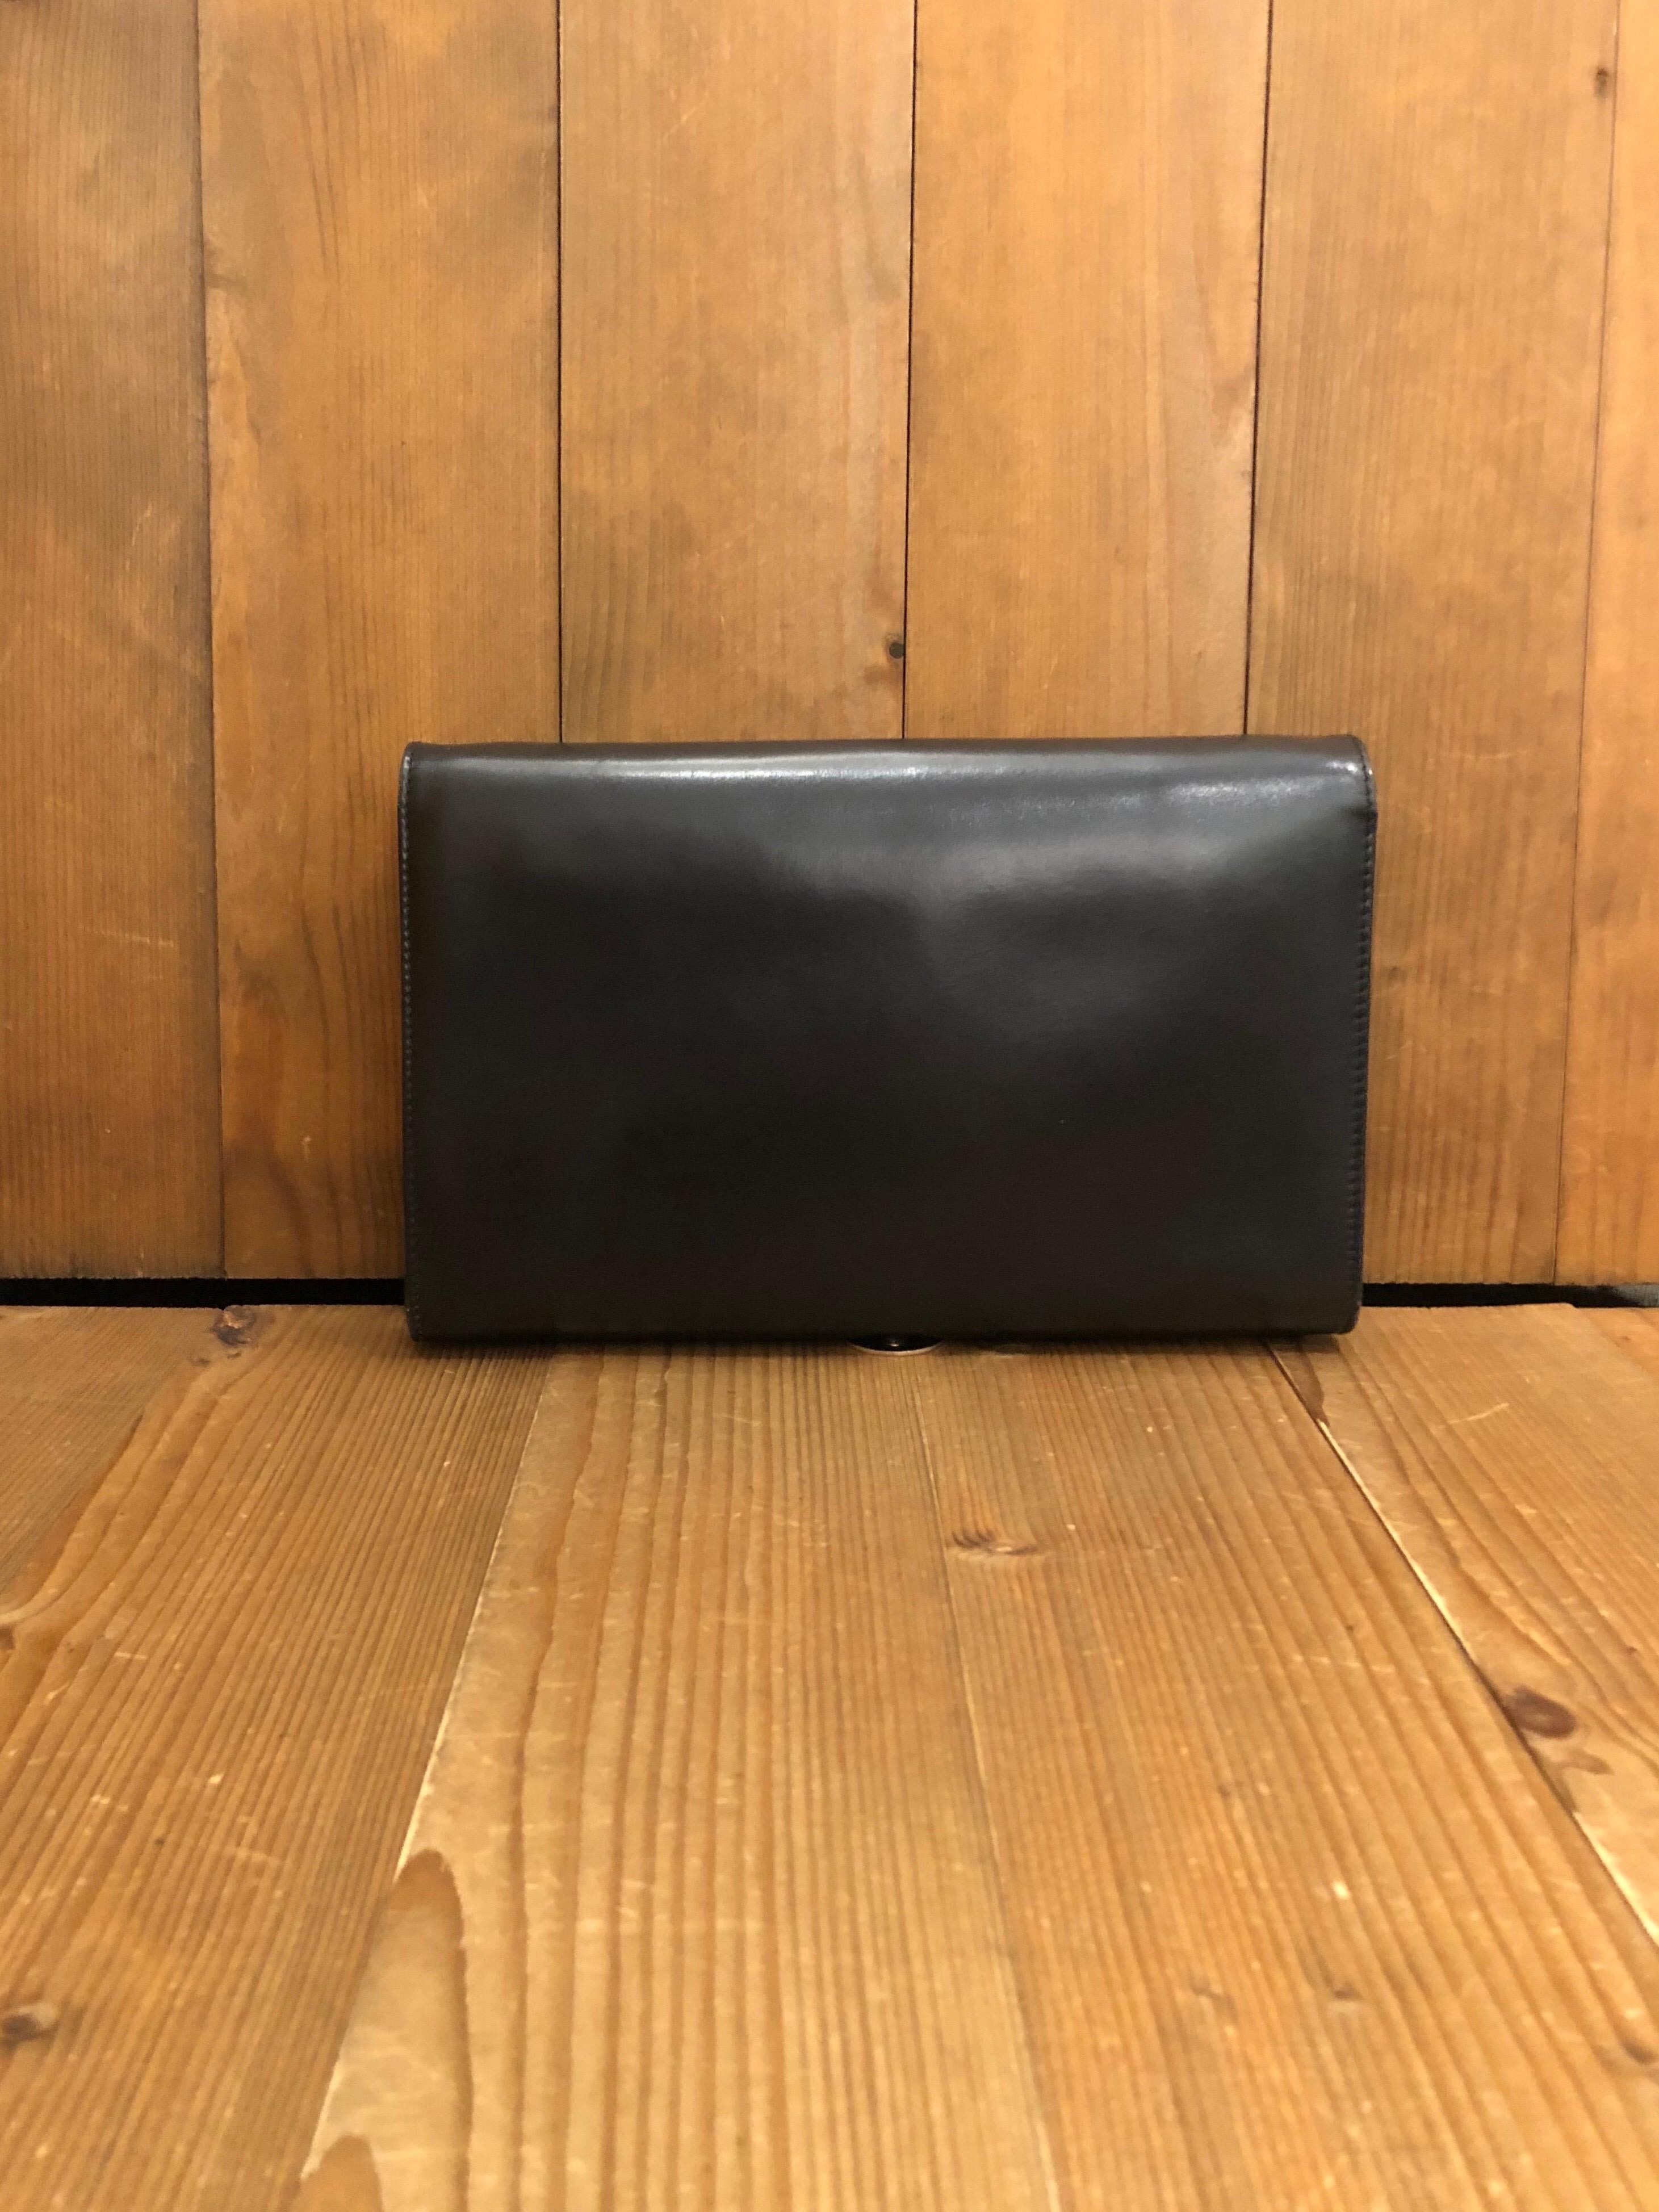 1989s Gucci two way clutch shoulder bag in black leather featuring a leather trimmed GG buckle closure. Made in Italy. Measures 9.75 x 6 x 1 inches with two main compartments and one interior zip pocket. Comes with replacement chain. 

Condition -